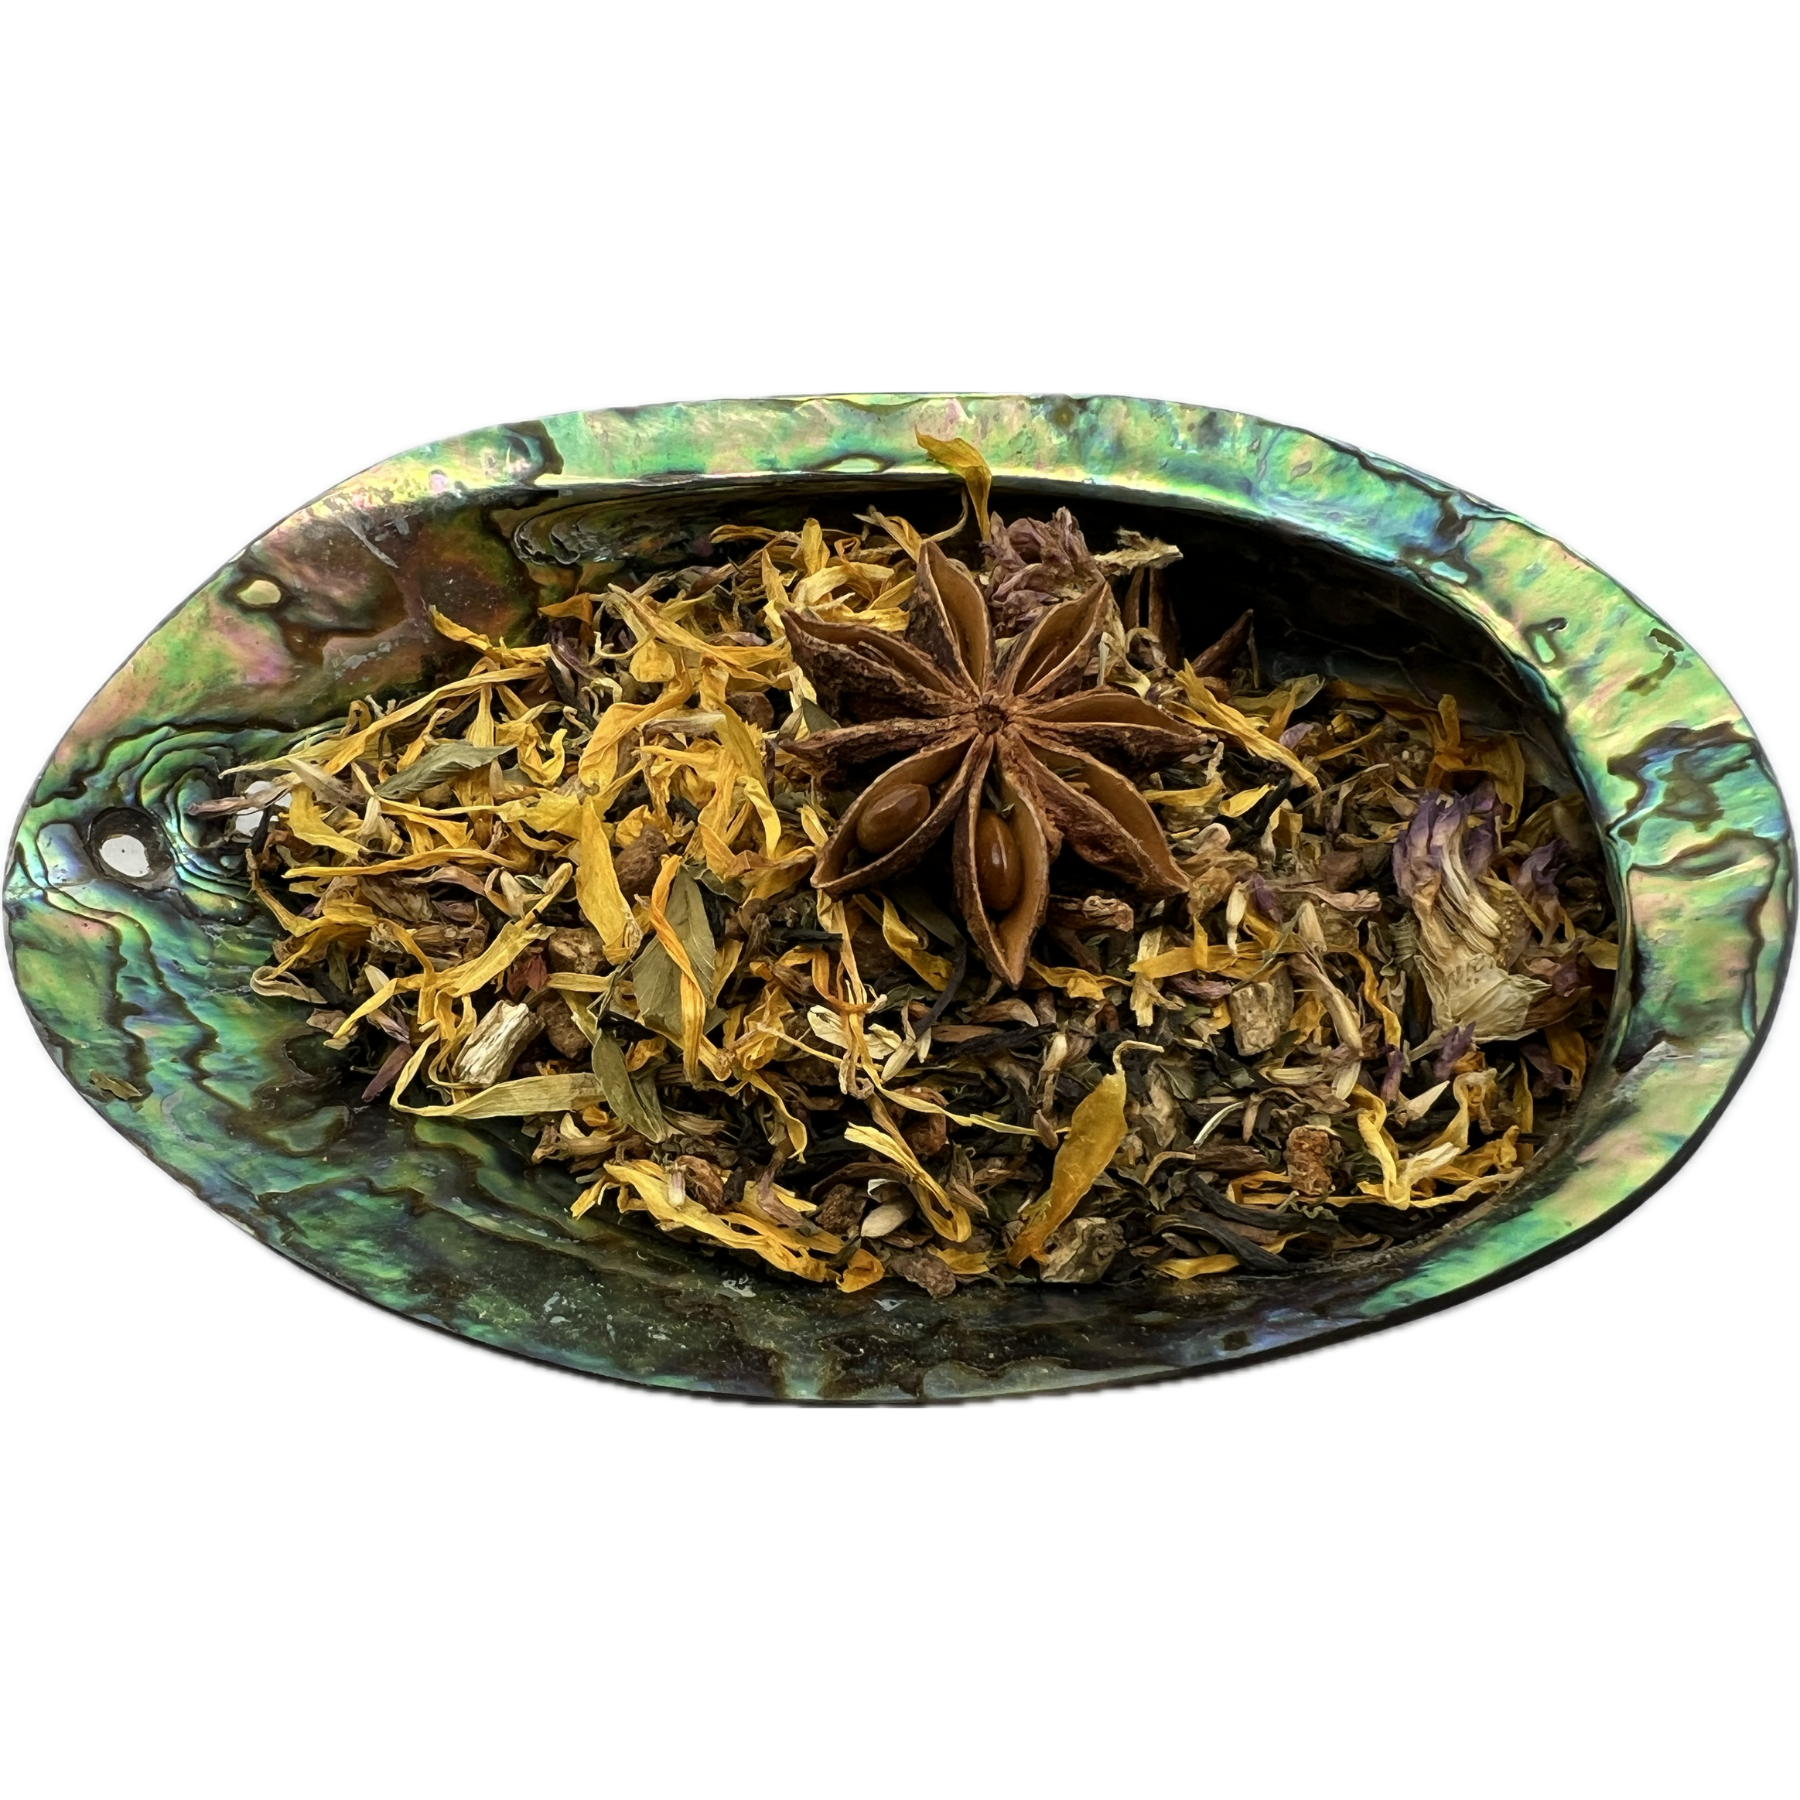 Dried mixed herbs called Dark Days Tea placed on a colorful shell bowl